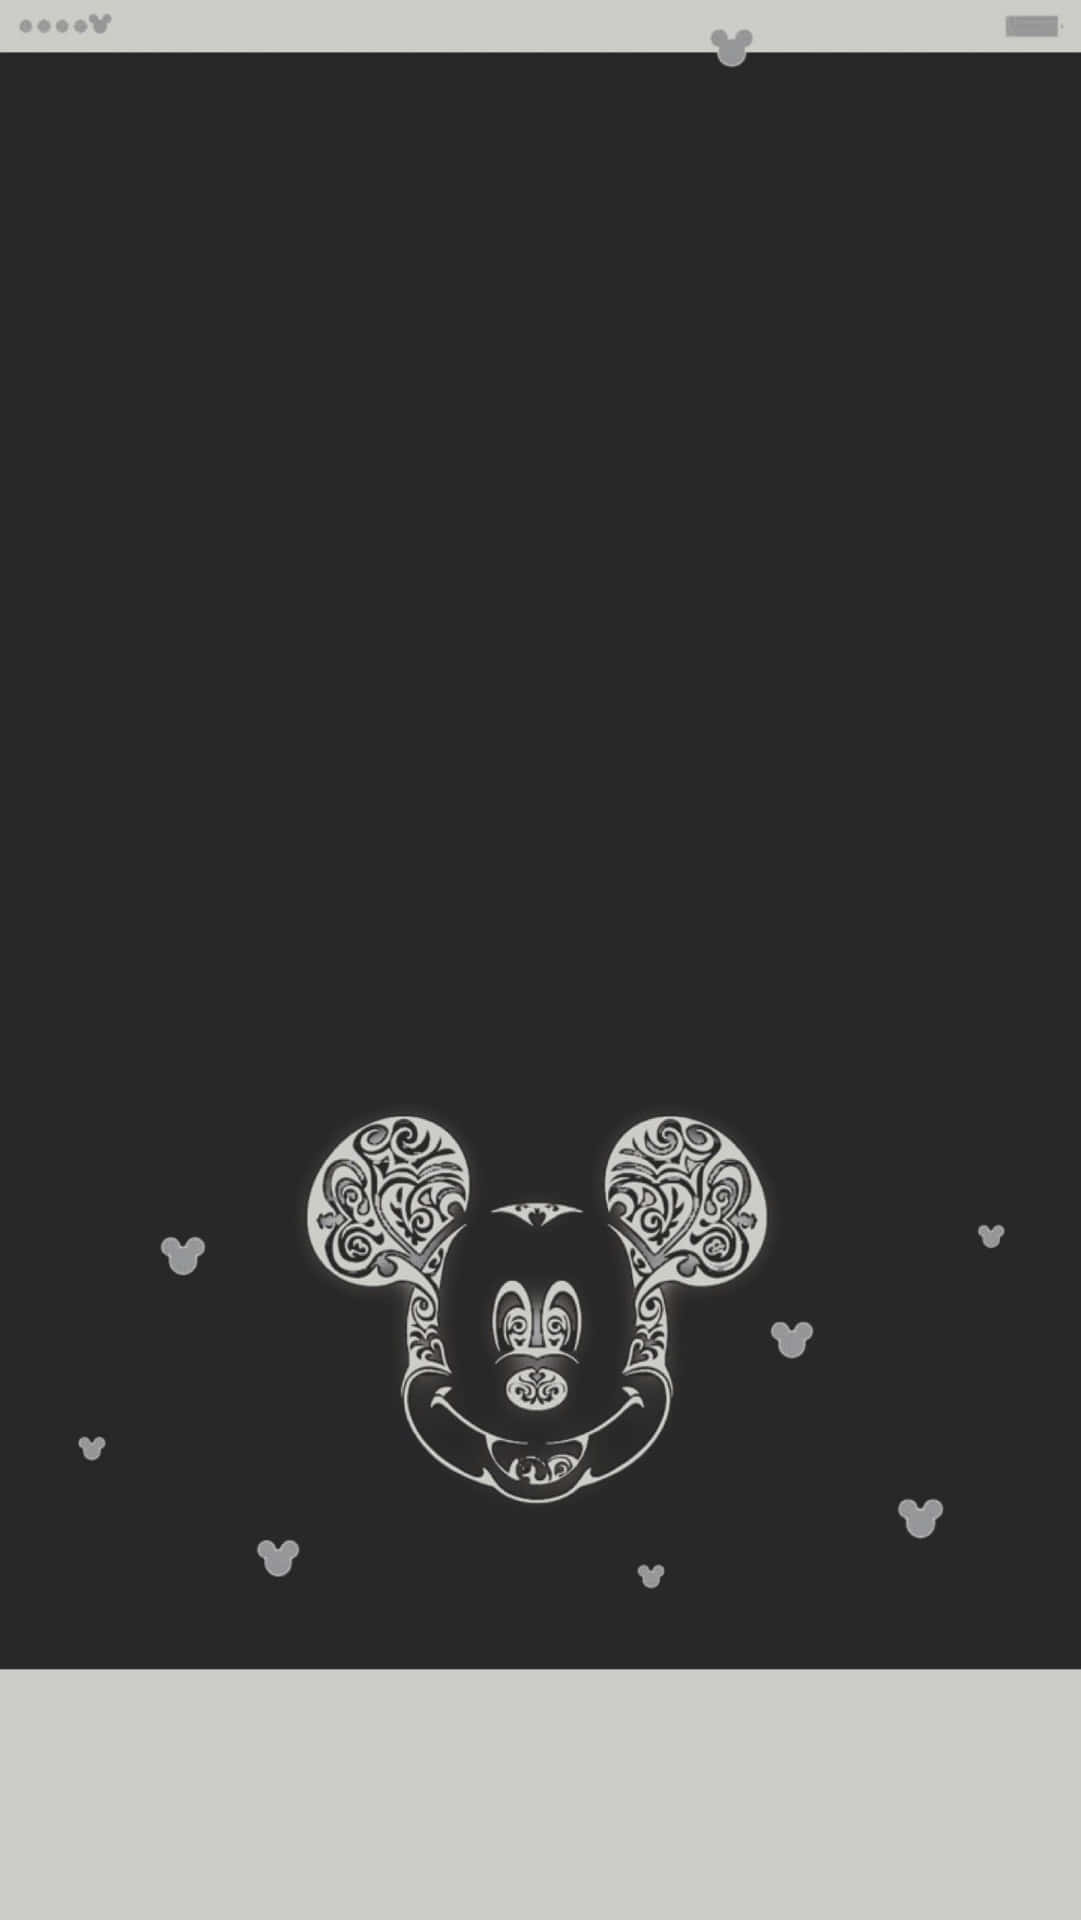 Download Cute Mickey Mouse Iphone Wallpaper | Wallpapers.com